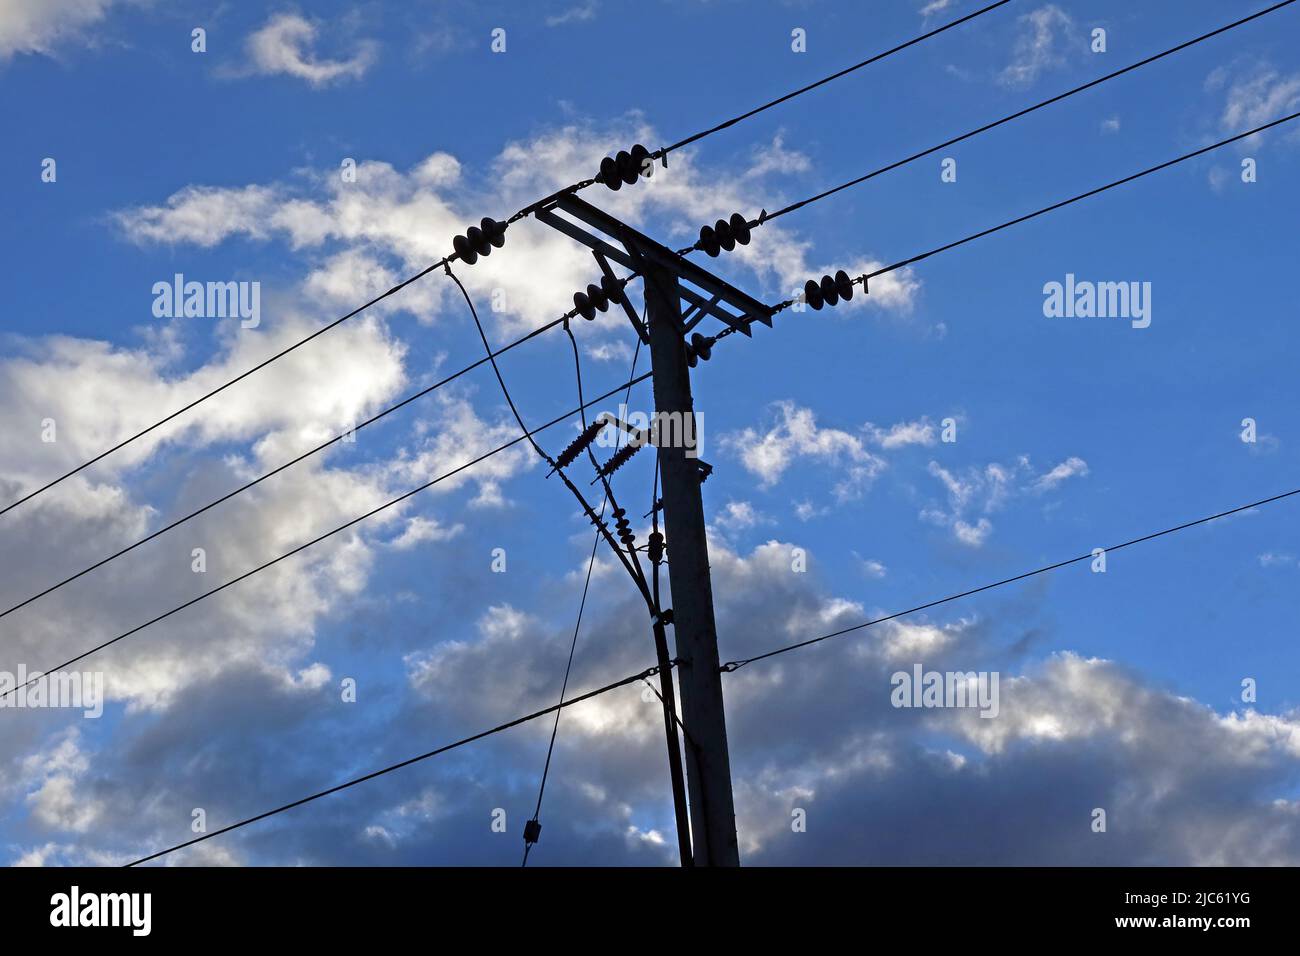 Rural three phase electrical power lines distribution, with insulators against a blue cloudy sky, Cheshire, England, UK, WA4 Stock Photo